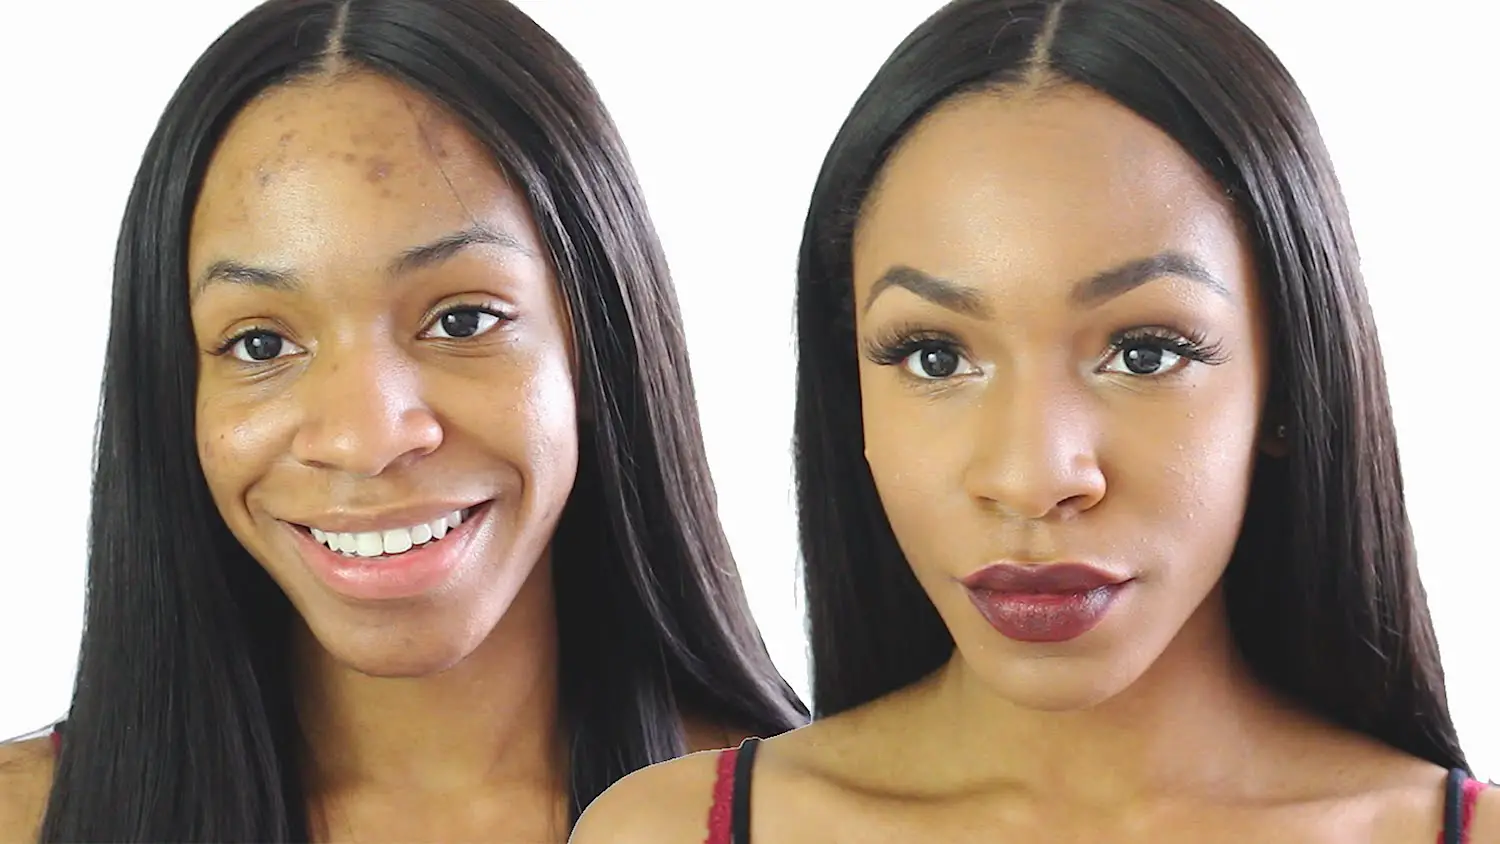 How To Cover Acne Bumps Or Scars With Makeup